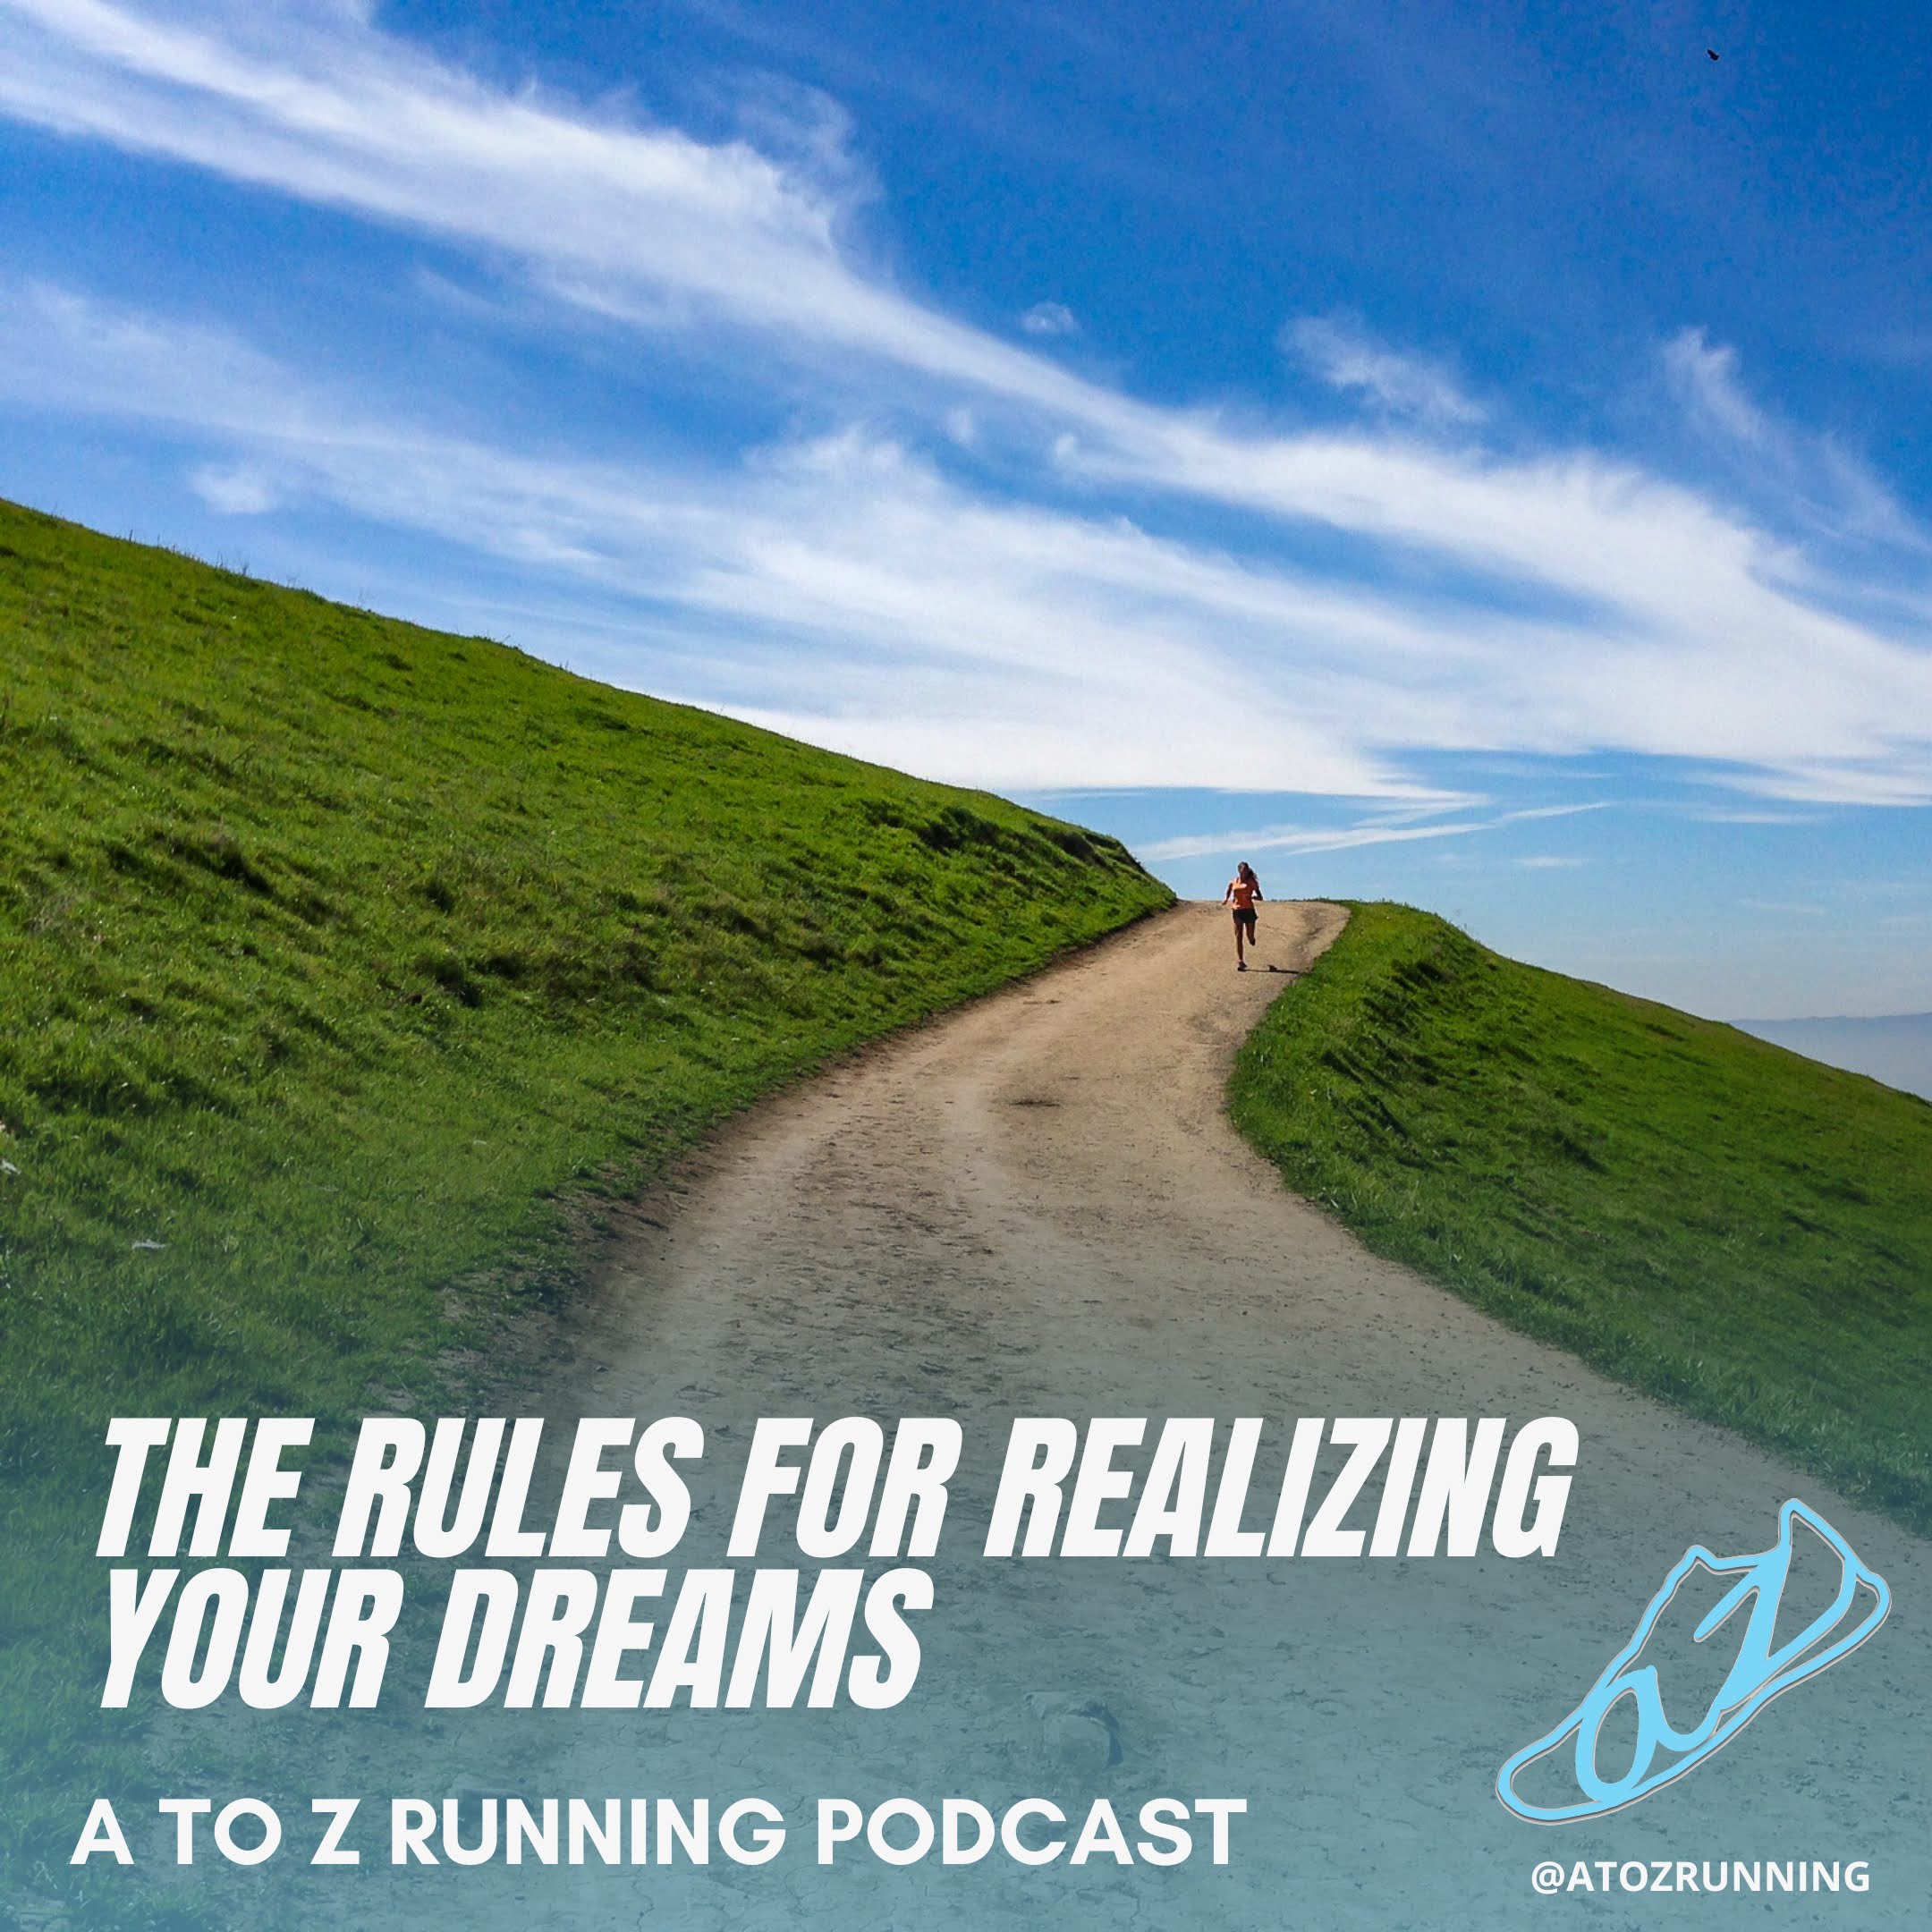 The rules for realizing your dreams with Andi Ripley running in the background in california on a dirt road, big blue skies, and sloping grass.